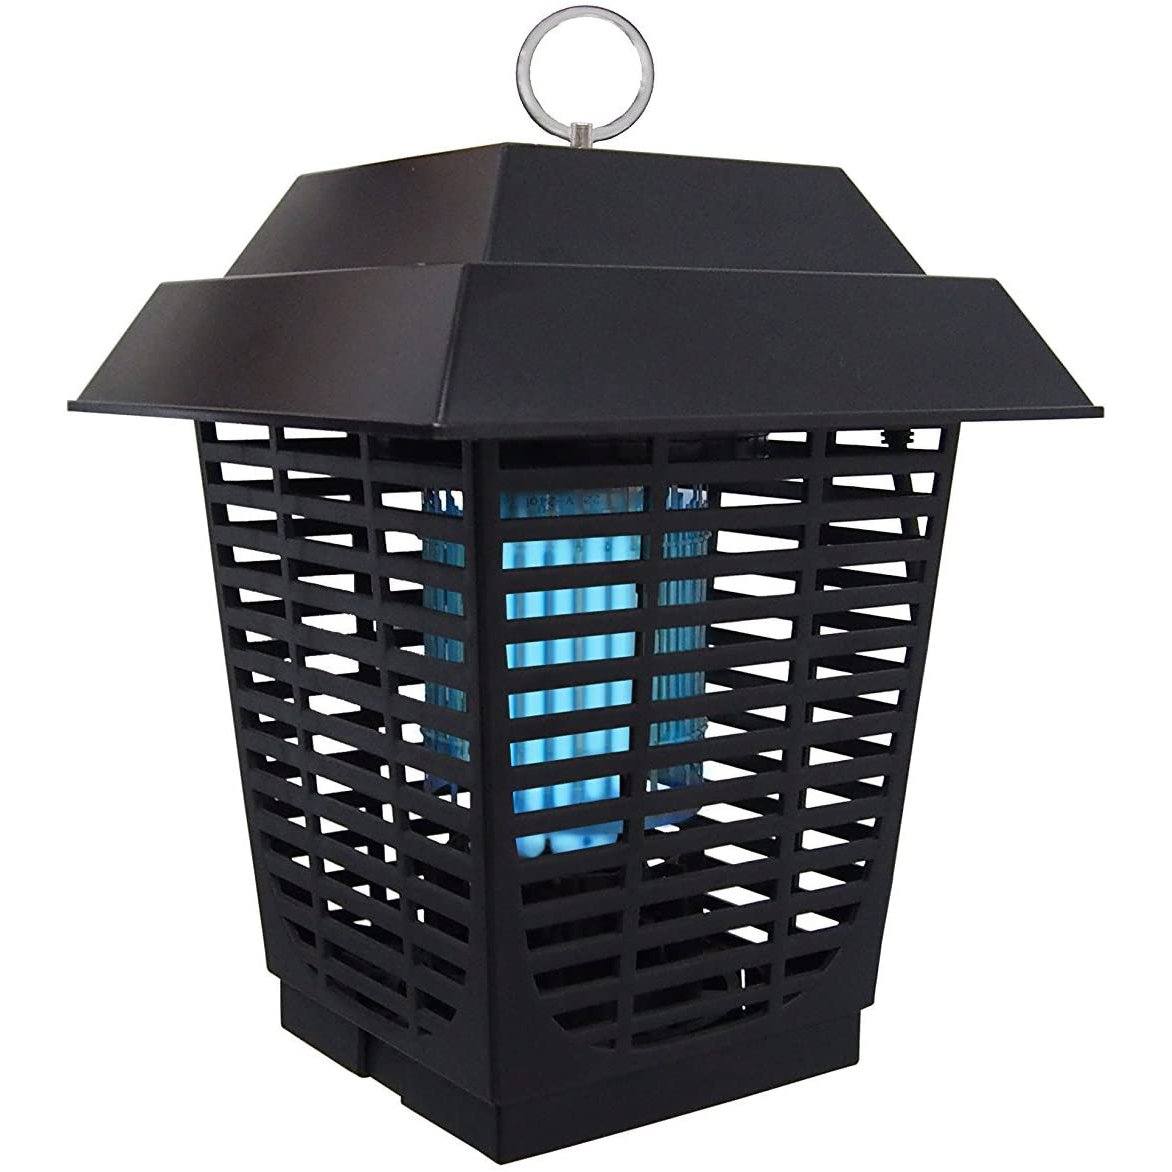 Koramzi Electronic Outdoor Insect Killer, Bug Zapper and Fly Killer